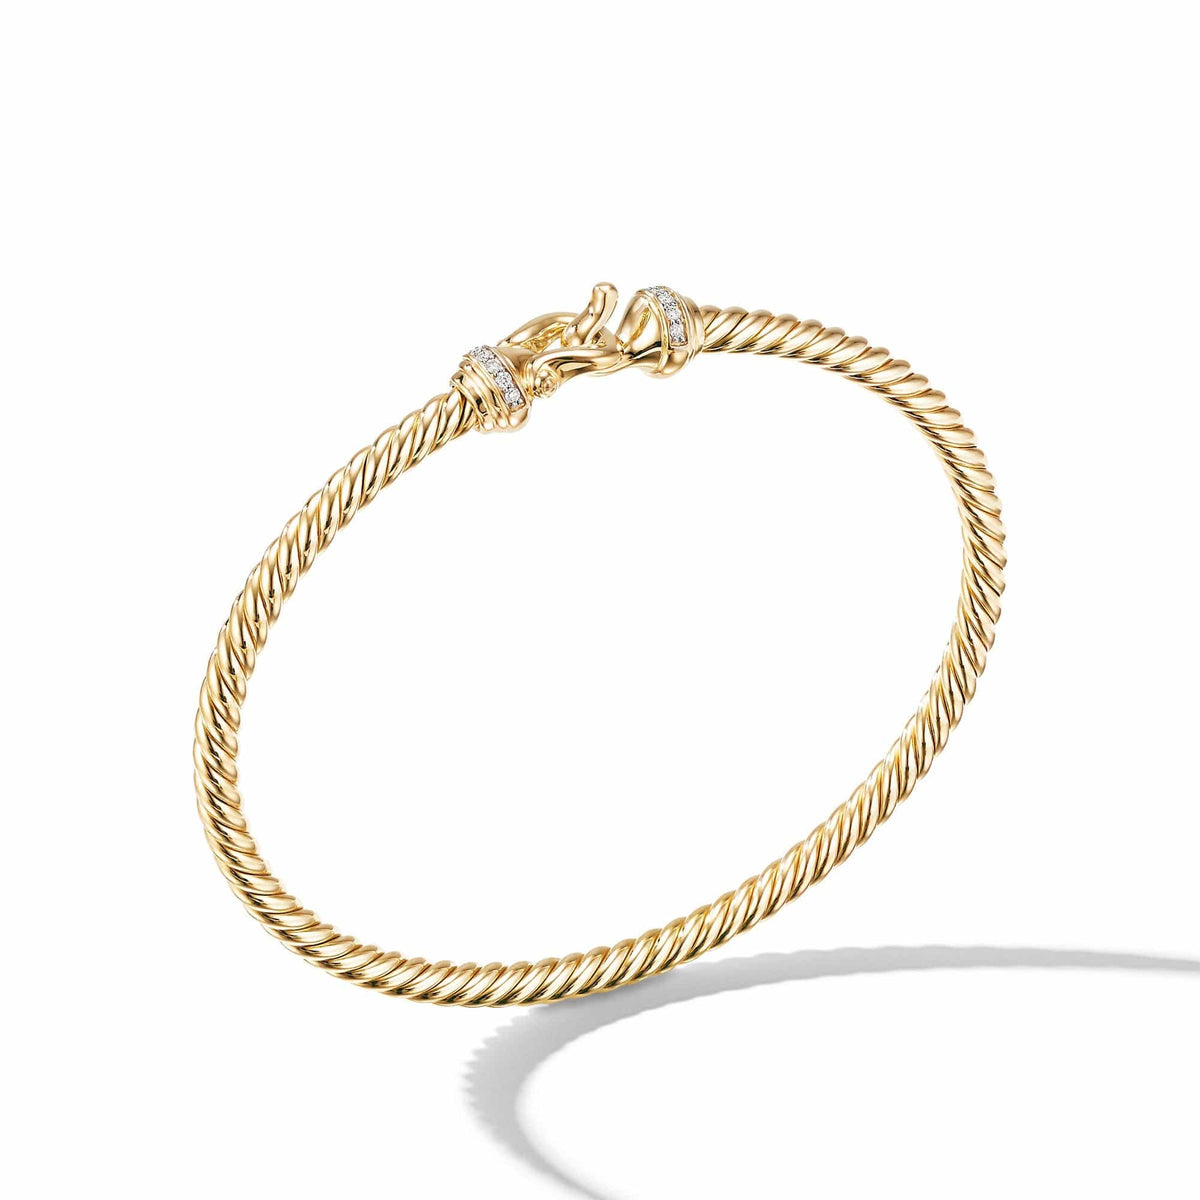 Buckle Bracelet in 18K Yellow Gold with Diamonds, Long's Jewelers